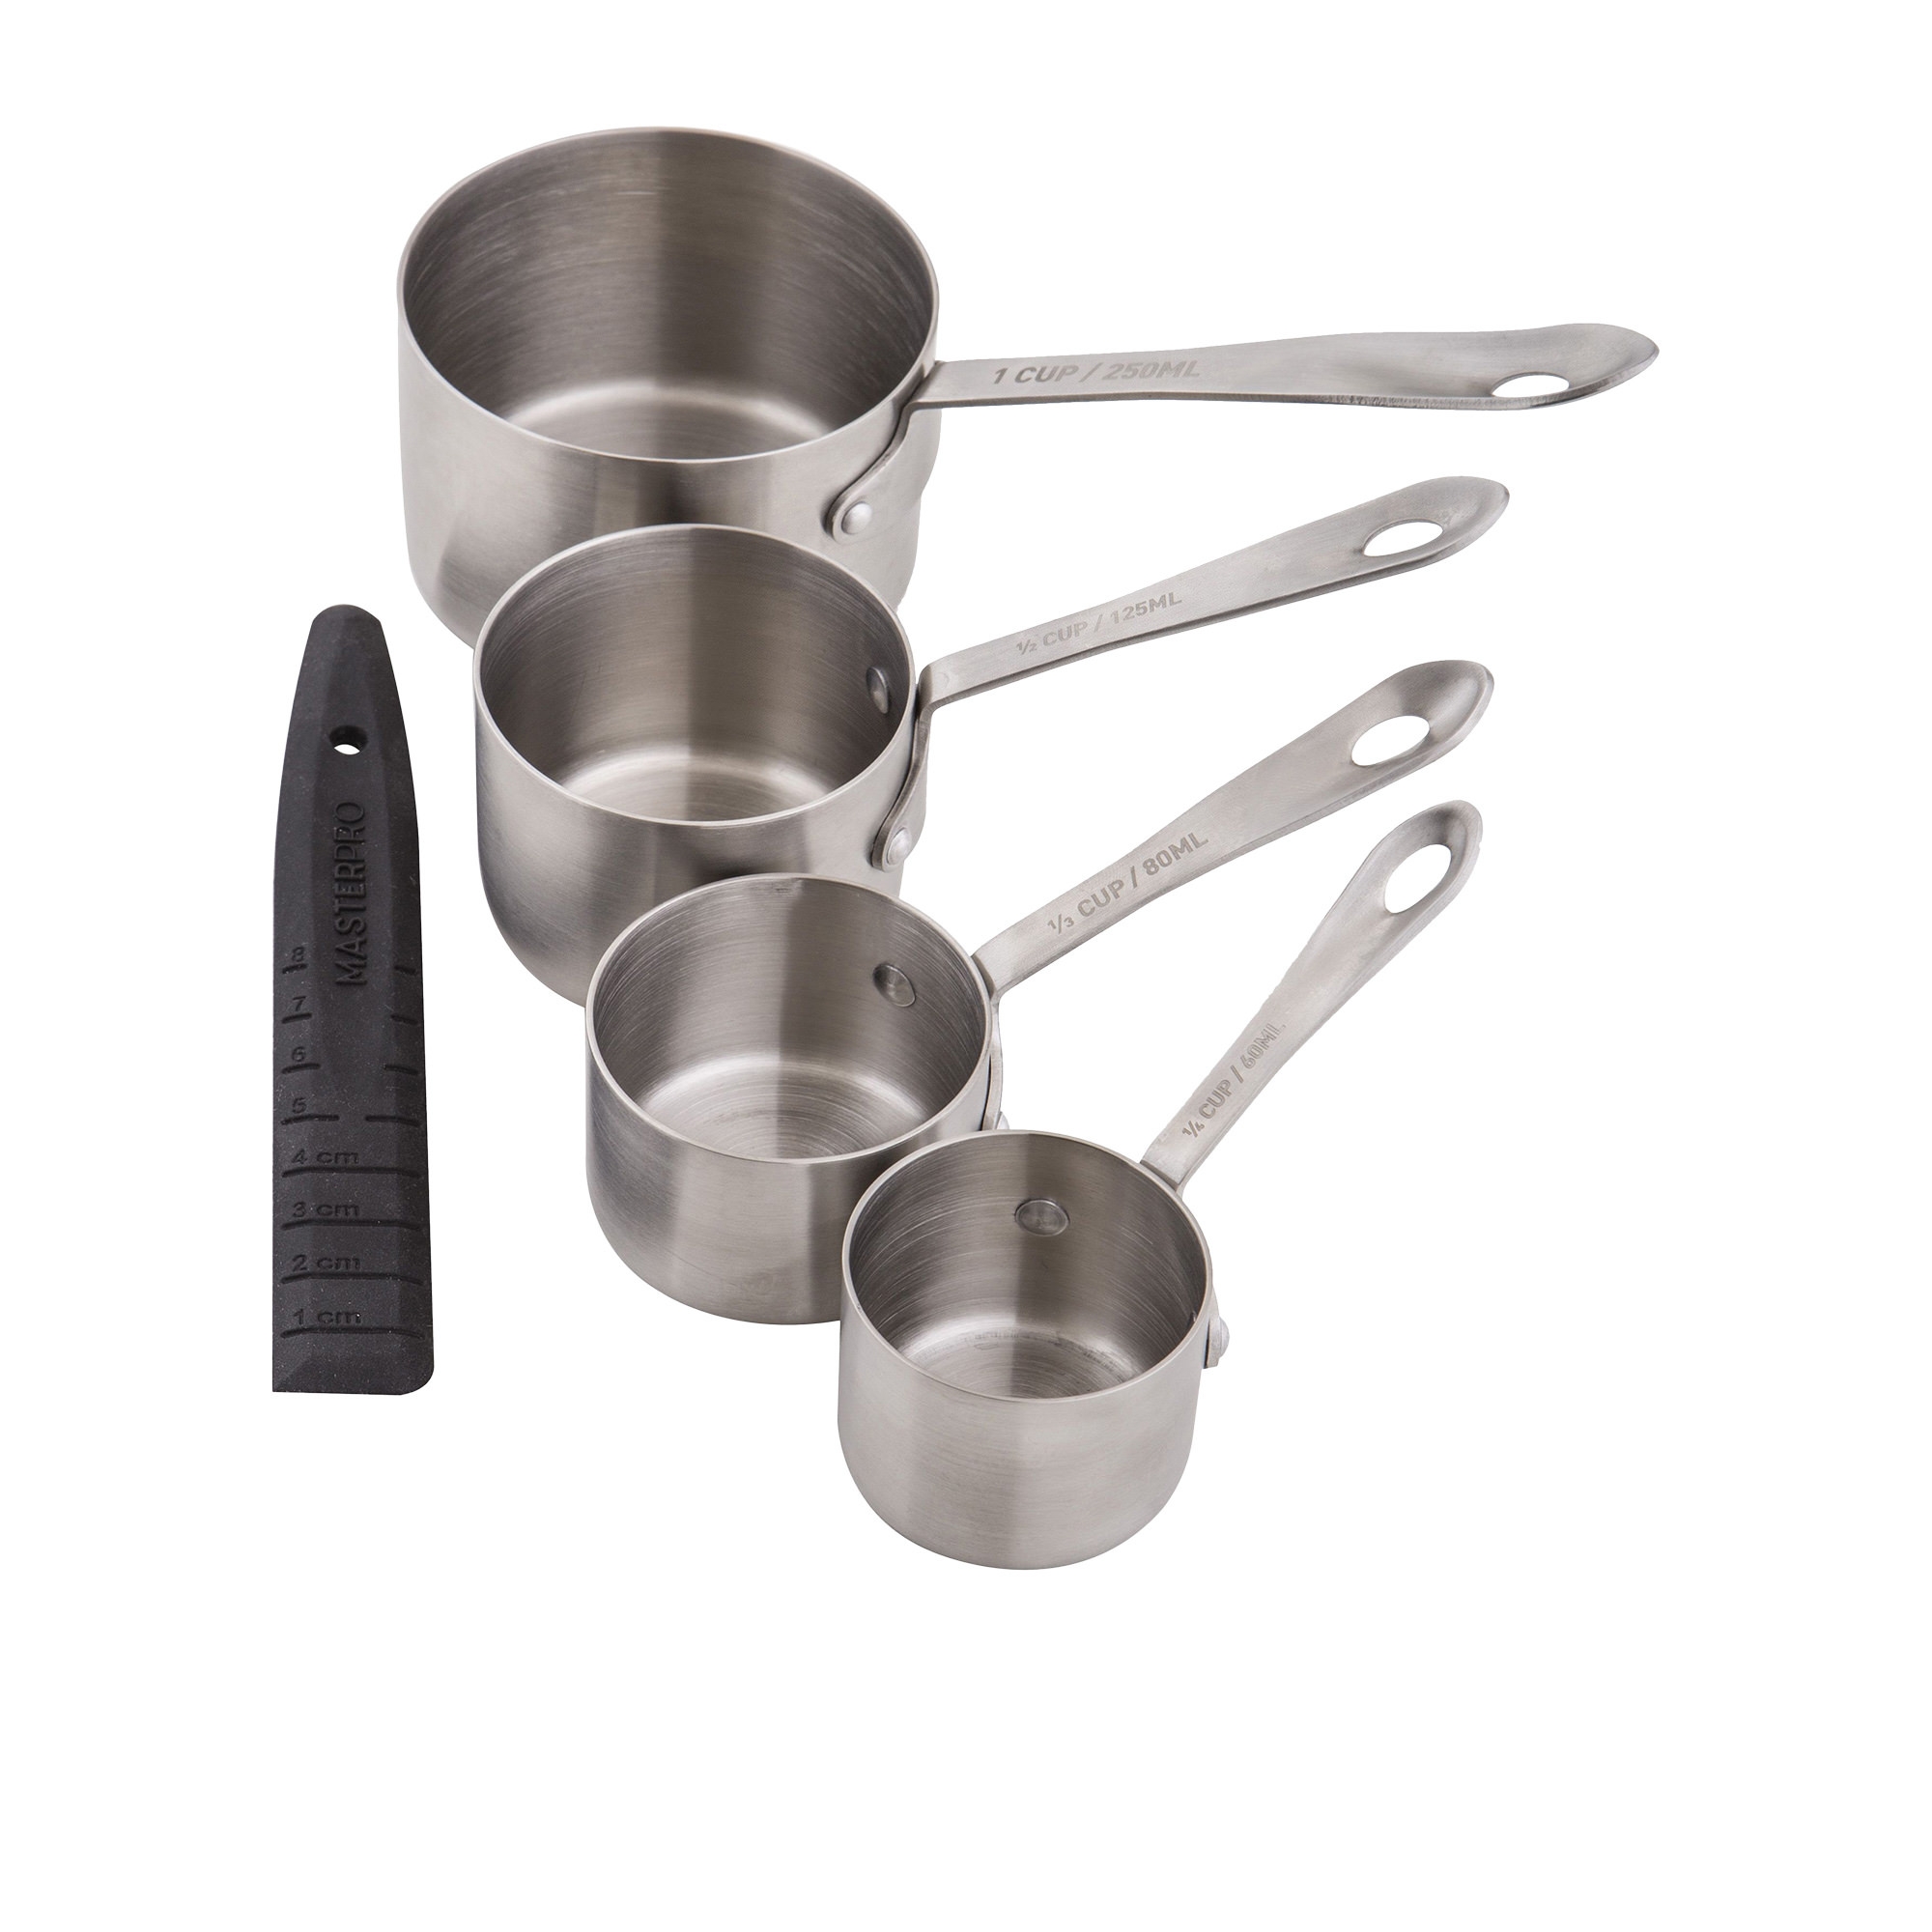 MasterPro Professional Measuring Cup with Leveller Set 5pc Image 1